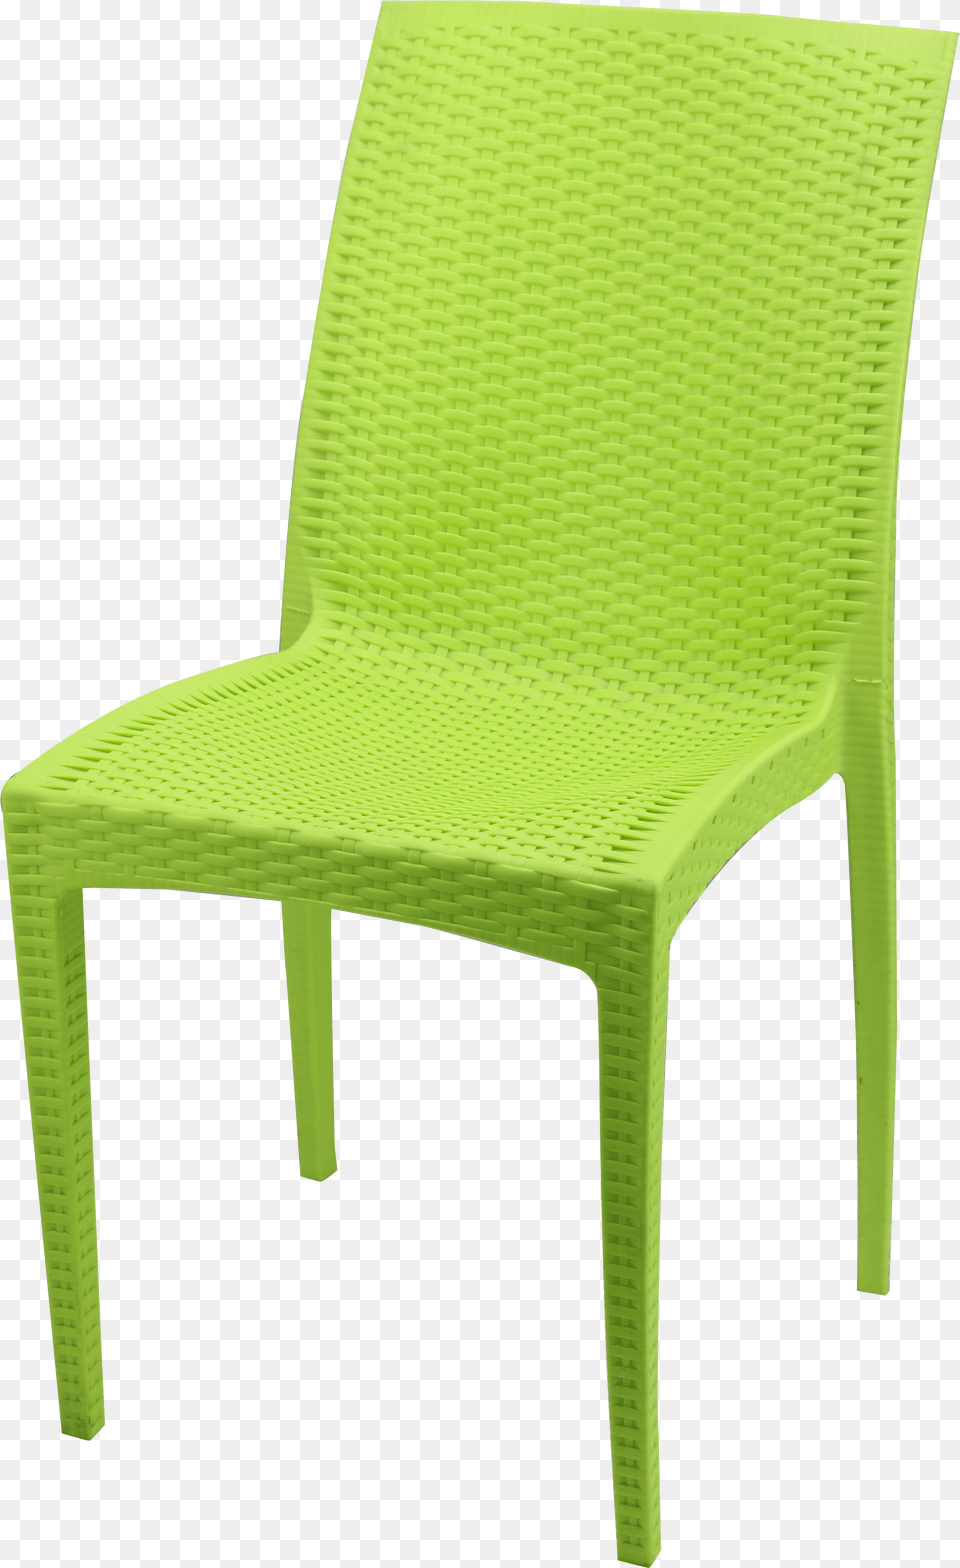 Plastic Chair Price In Bangladesh Free Png Download